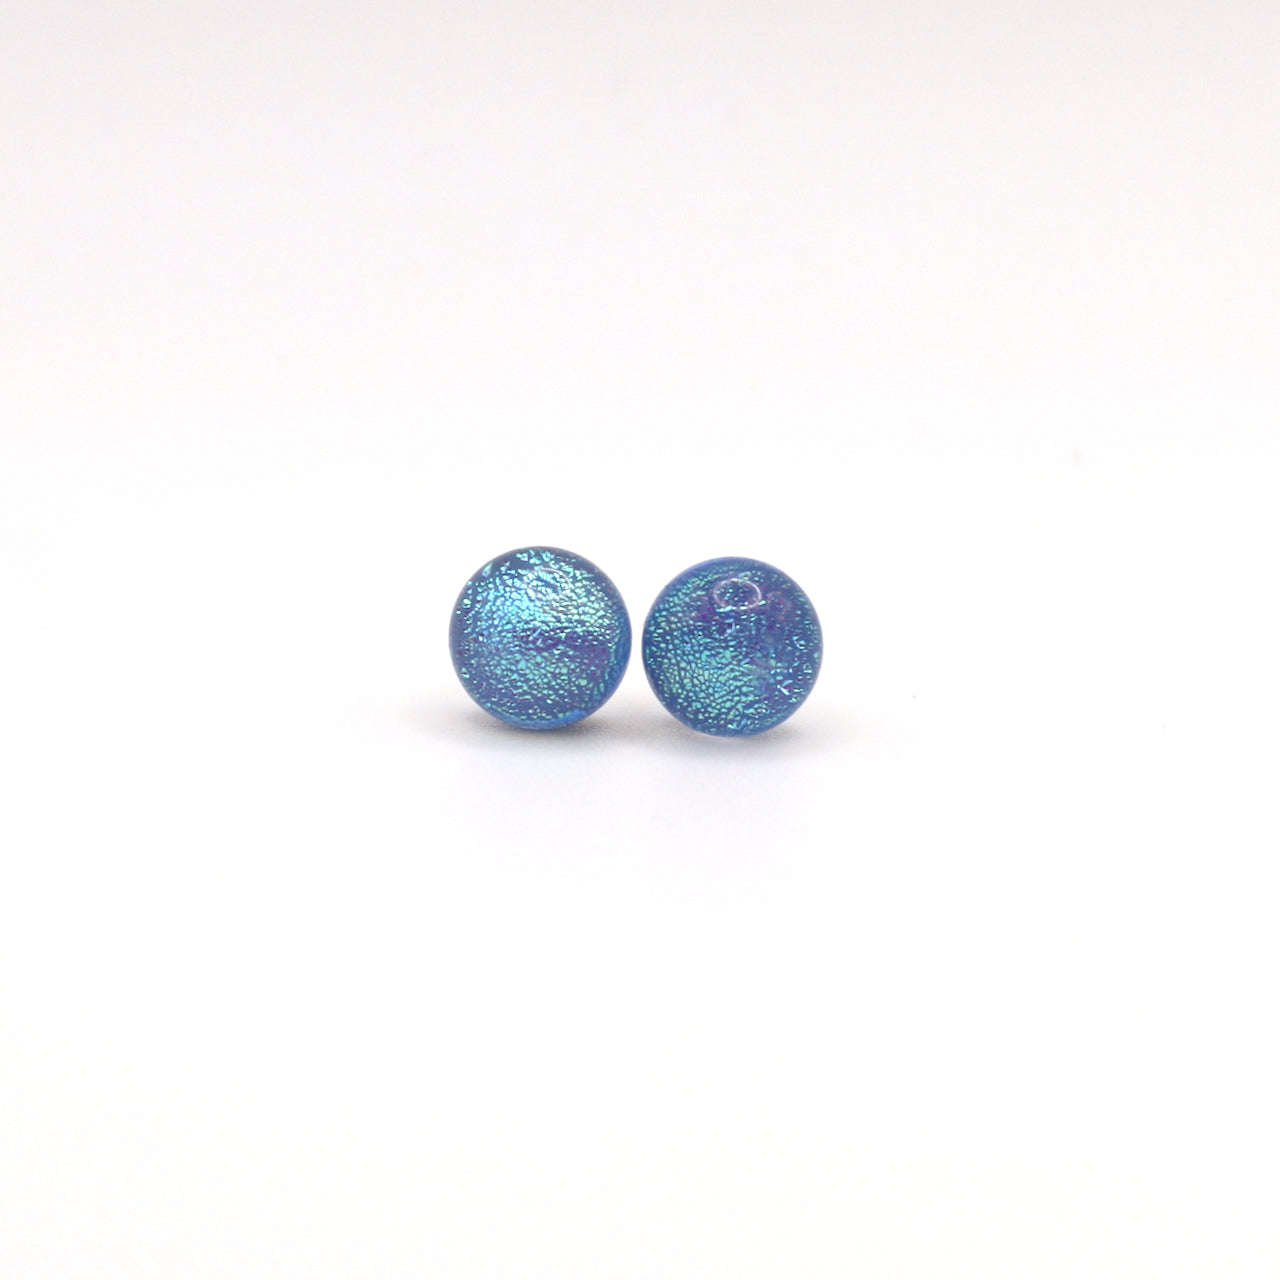 Tiny Dichroic Fused Glass Earring Studs - 3834